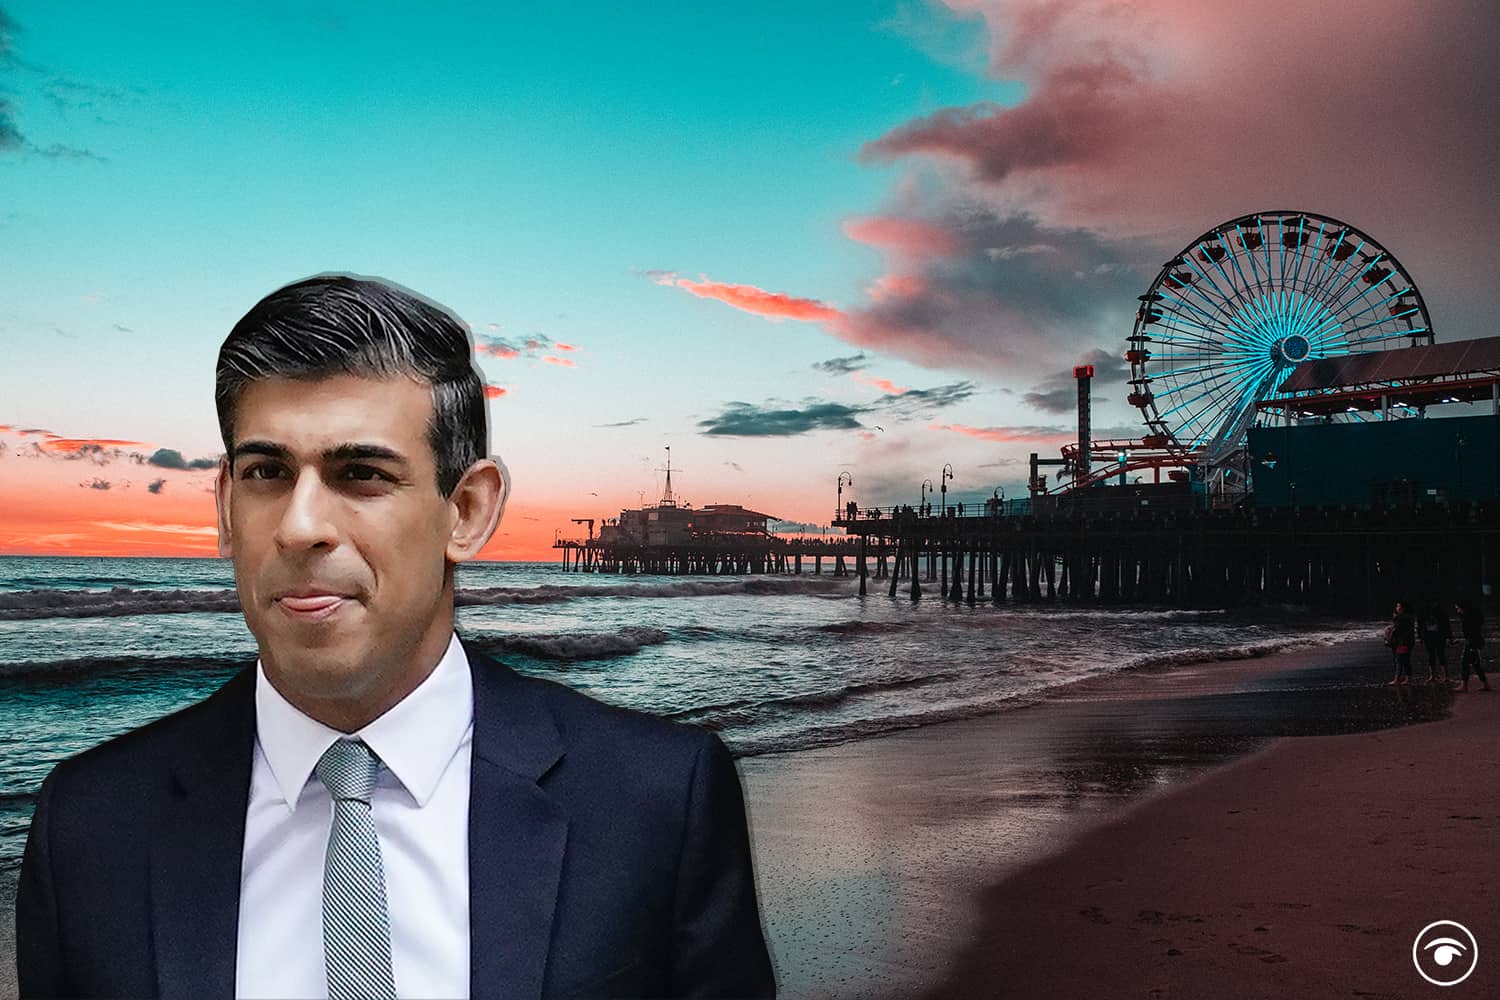 Sunak ignores pleas for an Emergency Budget as he jets off to Santa Monica